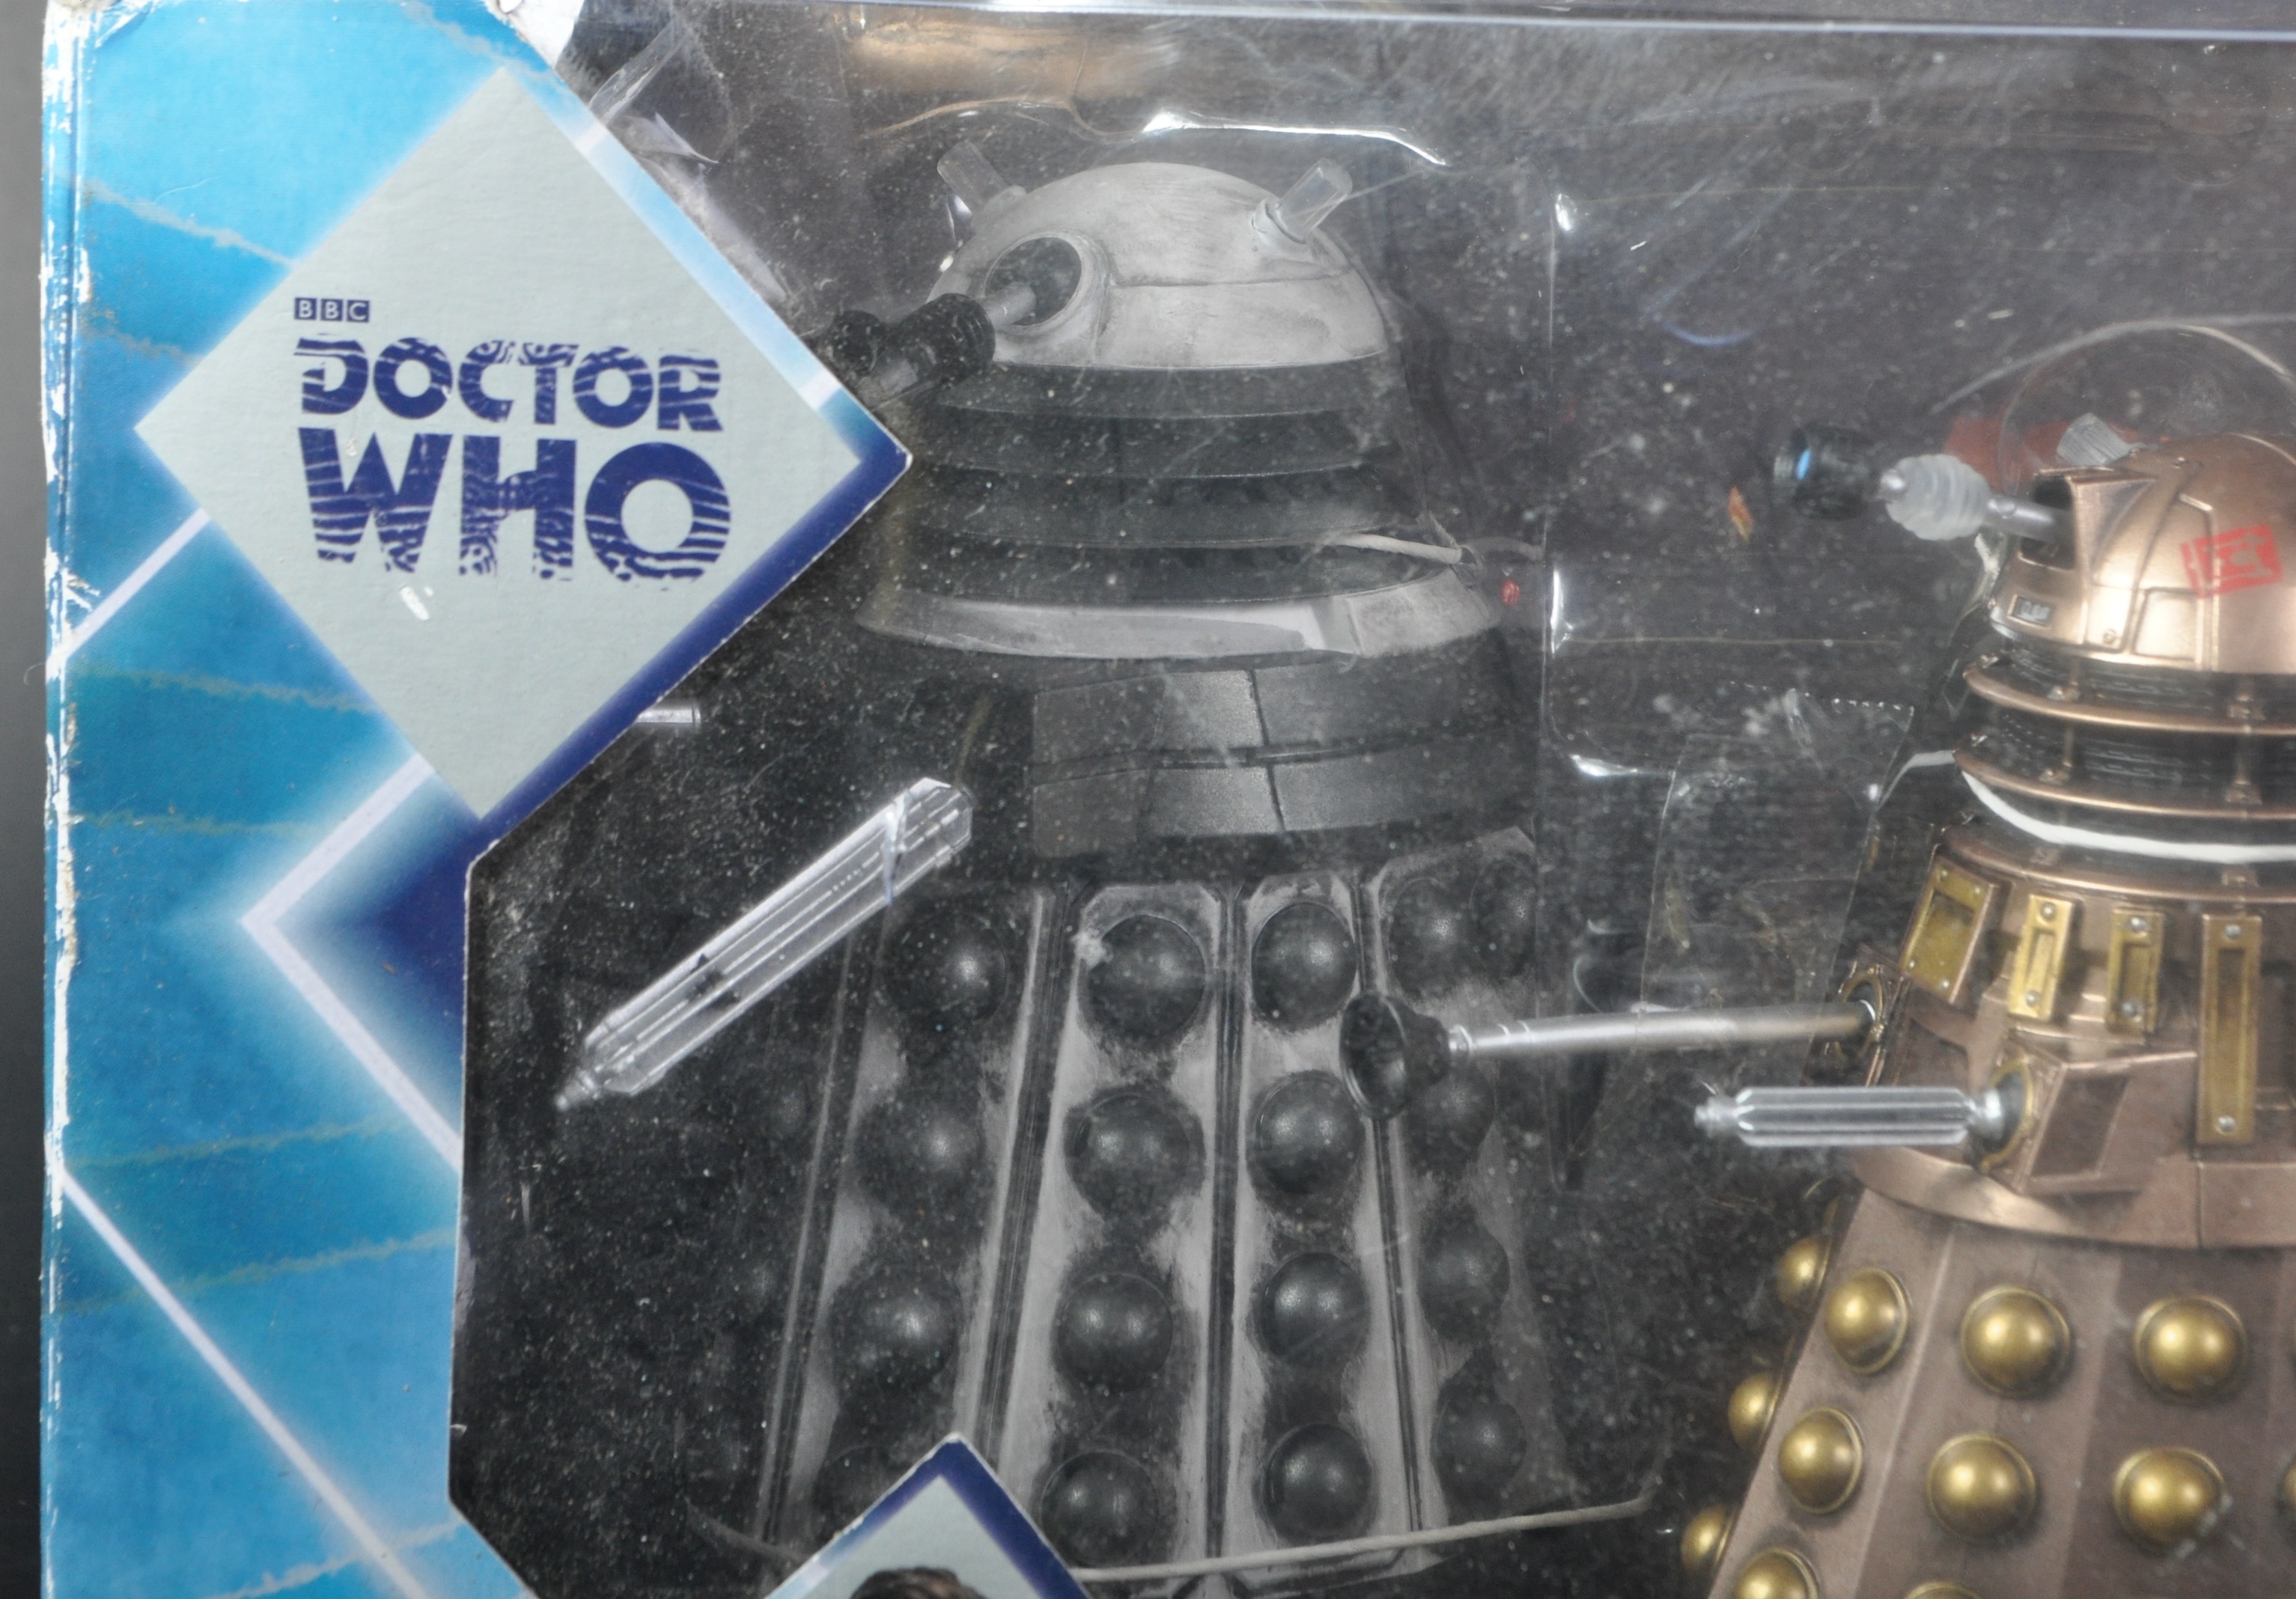 DOCTOR WHO - CHARACTER OPTIONS - ASYLUM OF THE DALEKS ACTION FIGURES - Image 2 of 4